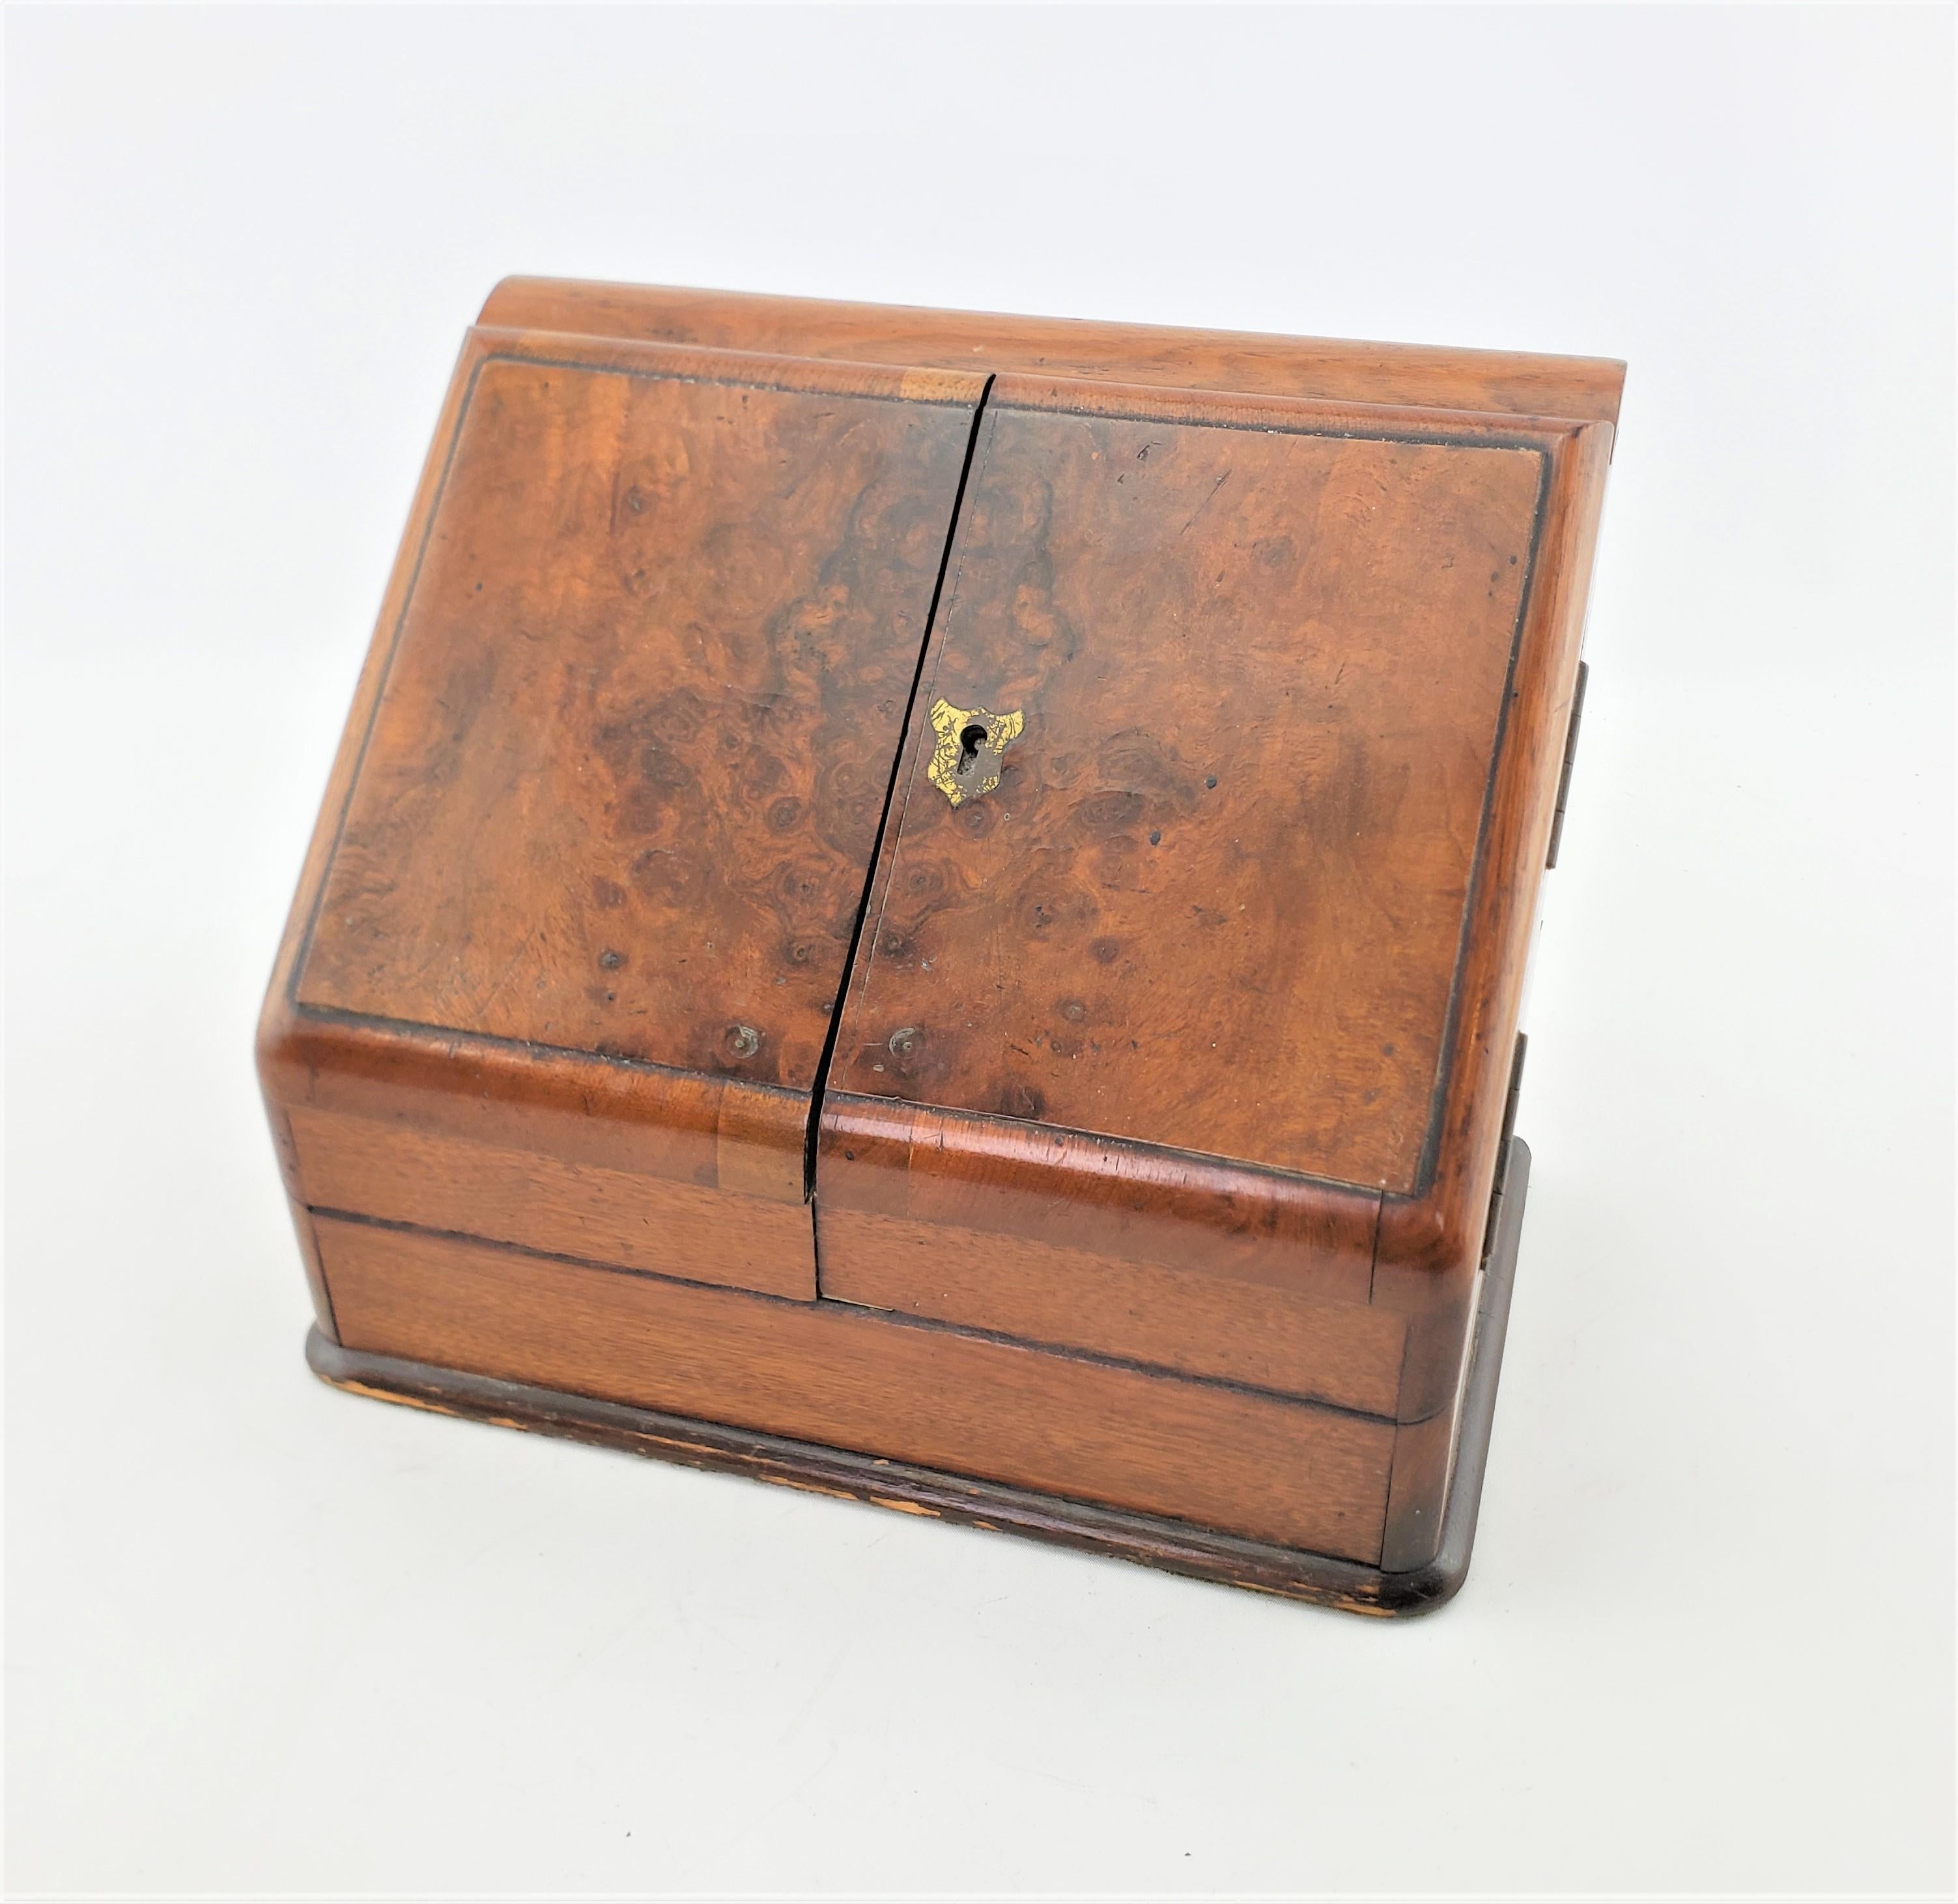 This antique lap desk and document box is unsigned, but presumed to have originated from England and date to approximately 1825 and done in the period Early Victorian style. This small travel sized lap desk is made of wood with brass hinges and